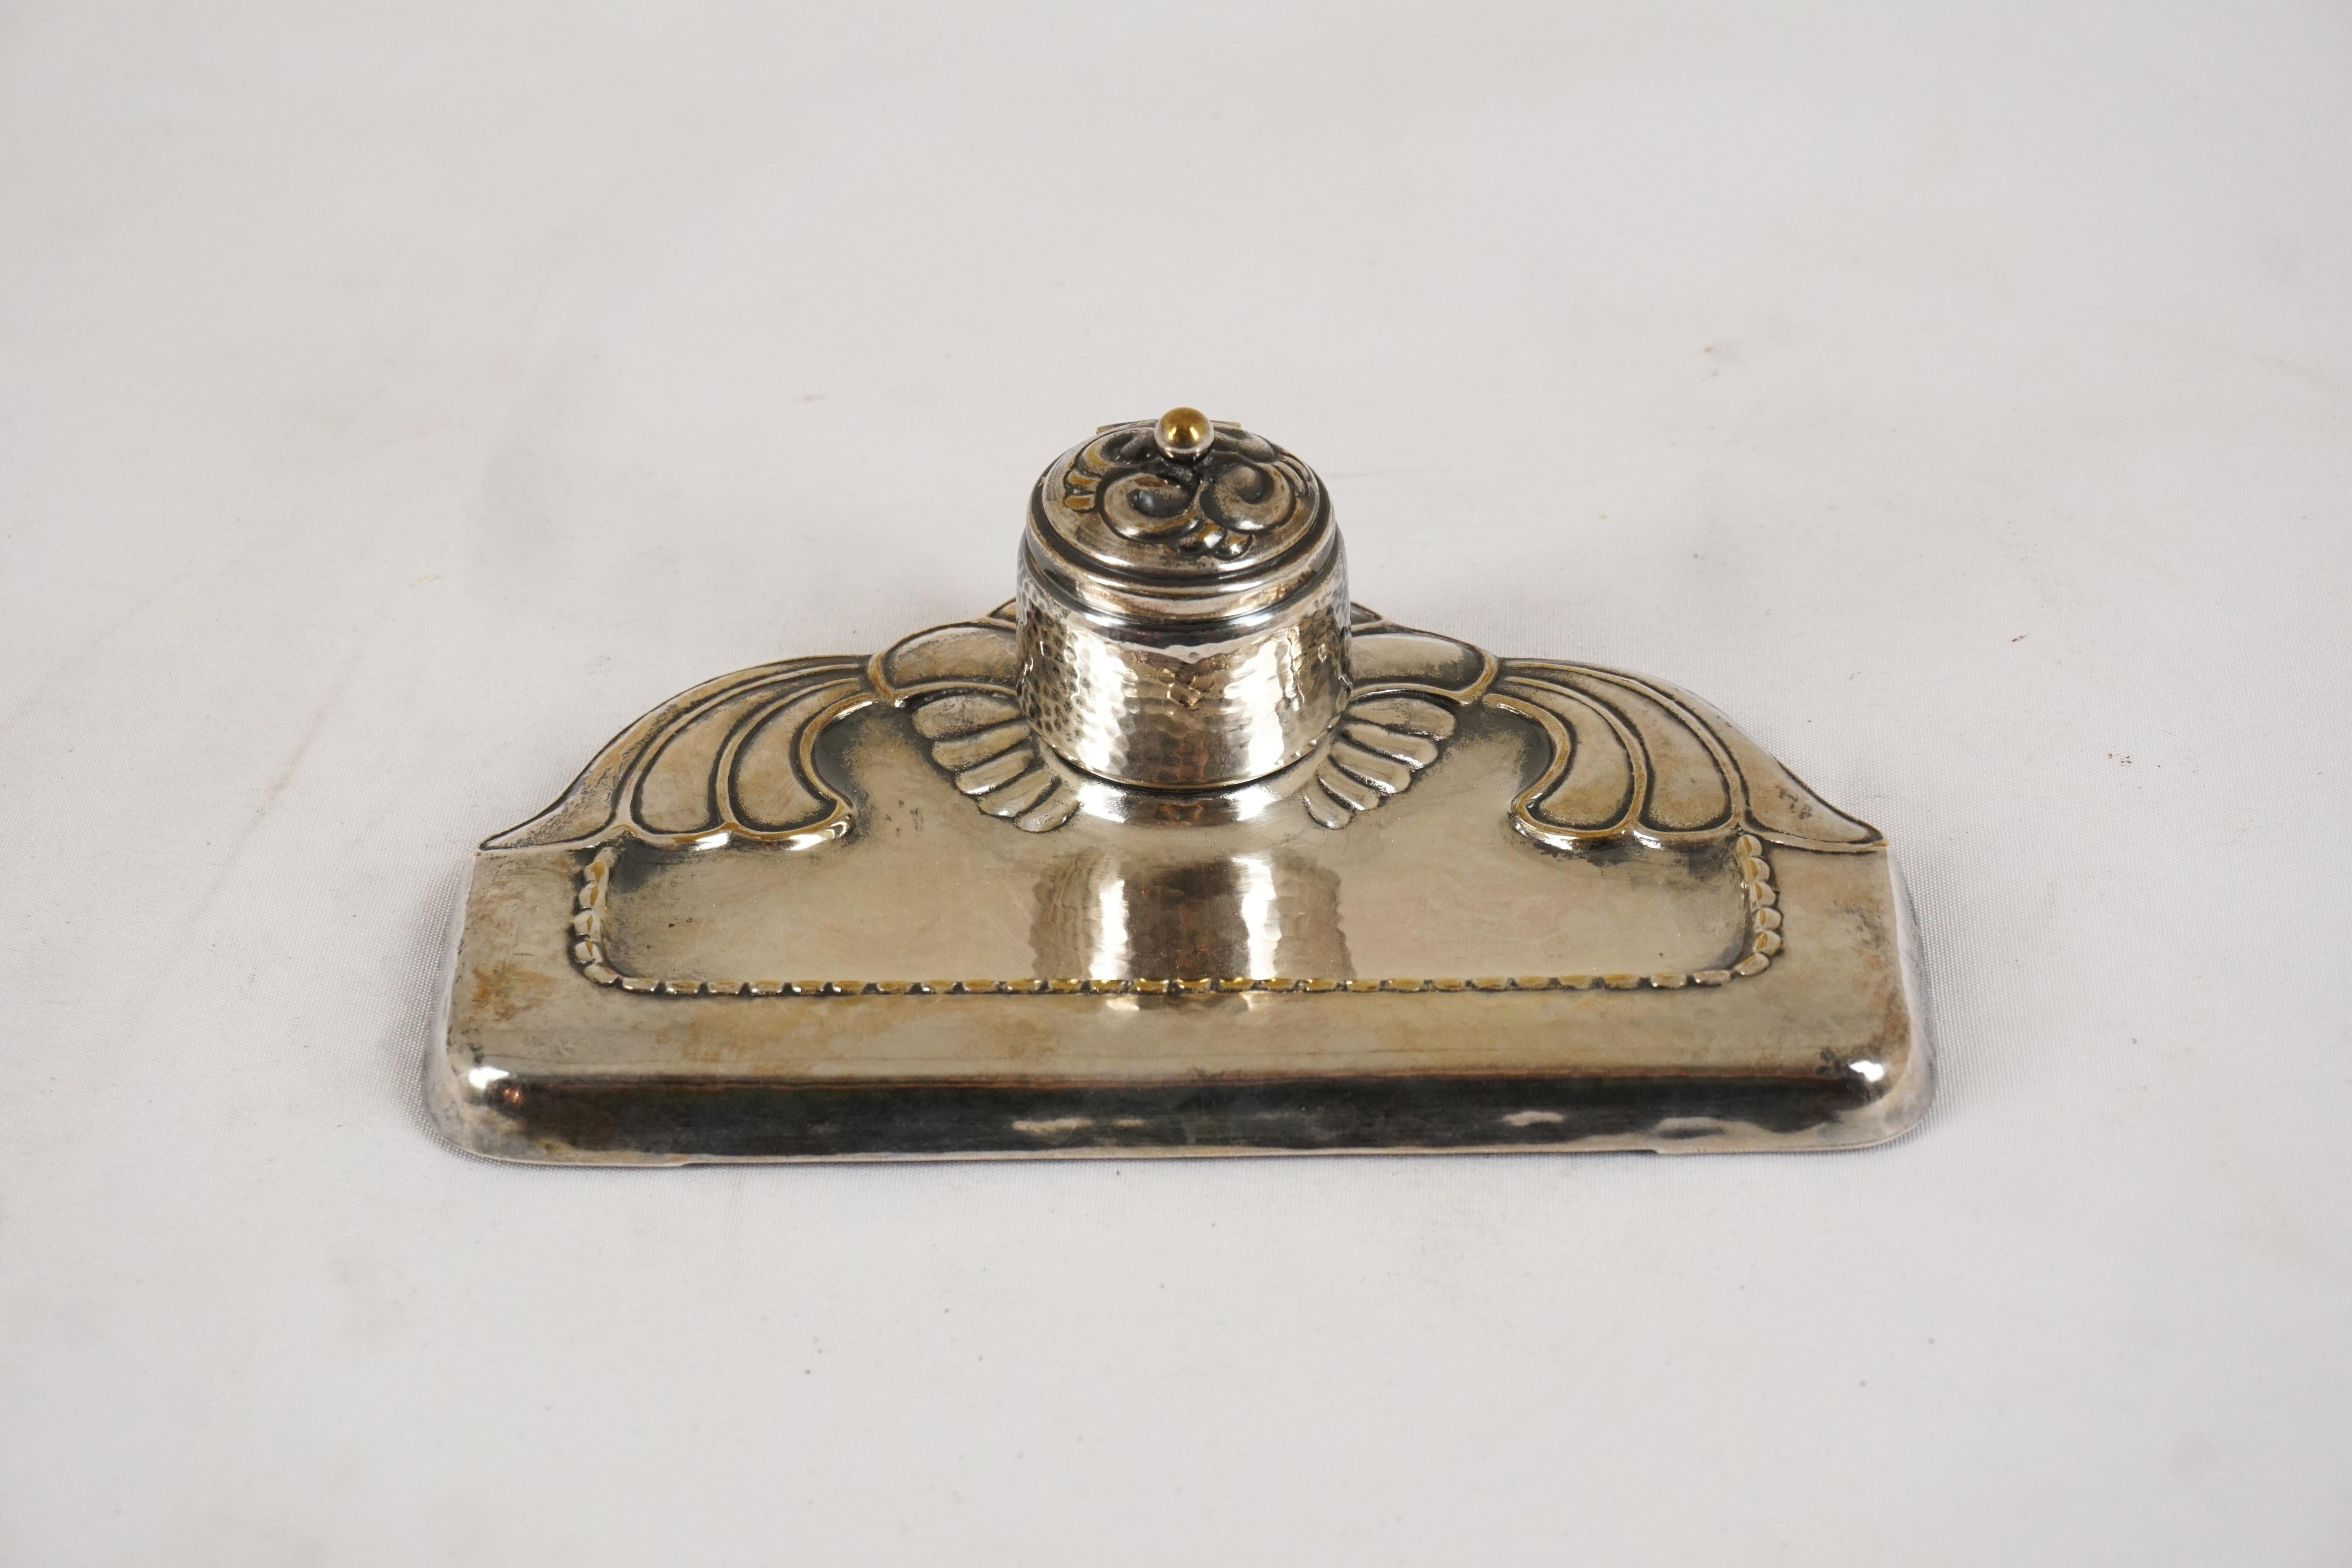 Antique silver plated art nouveau inkstand, Scotland 1910, H554

Scotland 1910
Silver plate
Embossed lid opens to reveal glass liner
Shaped base with pen tray to the front

H554

Measures: 7.5